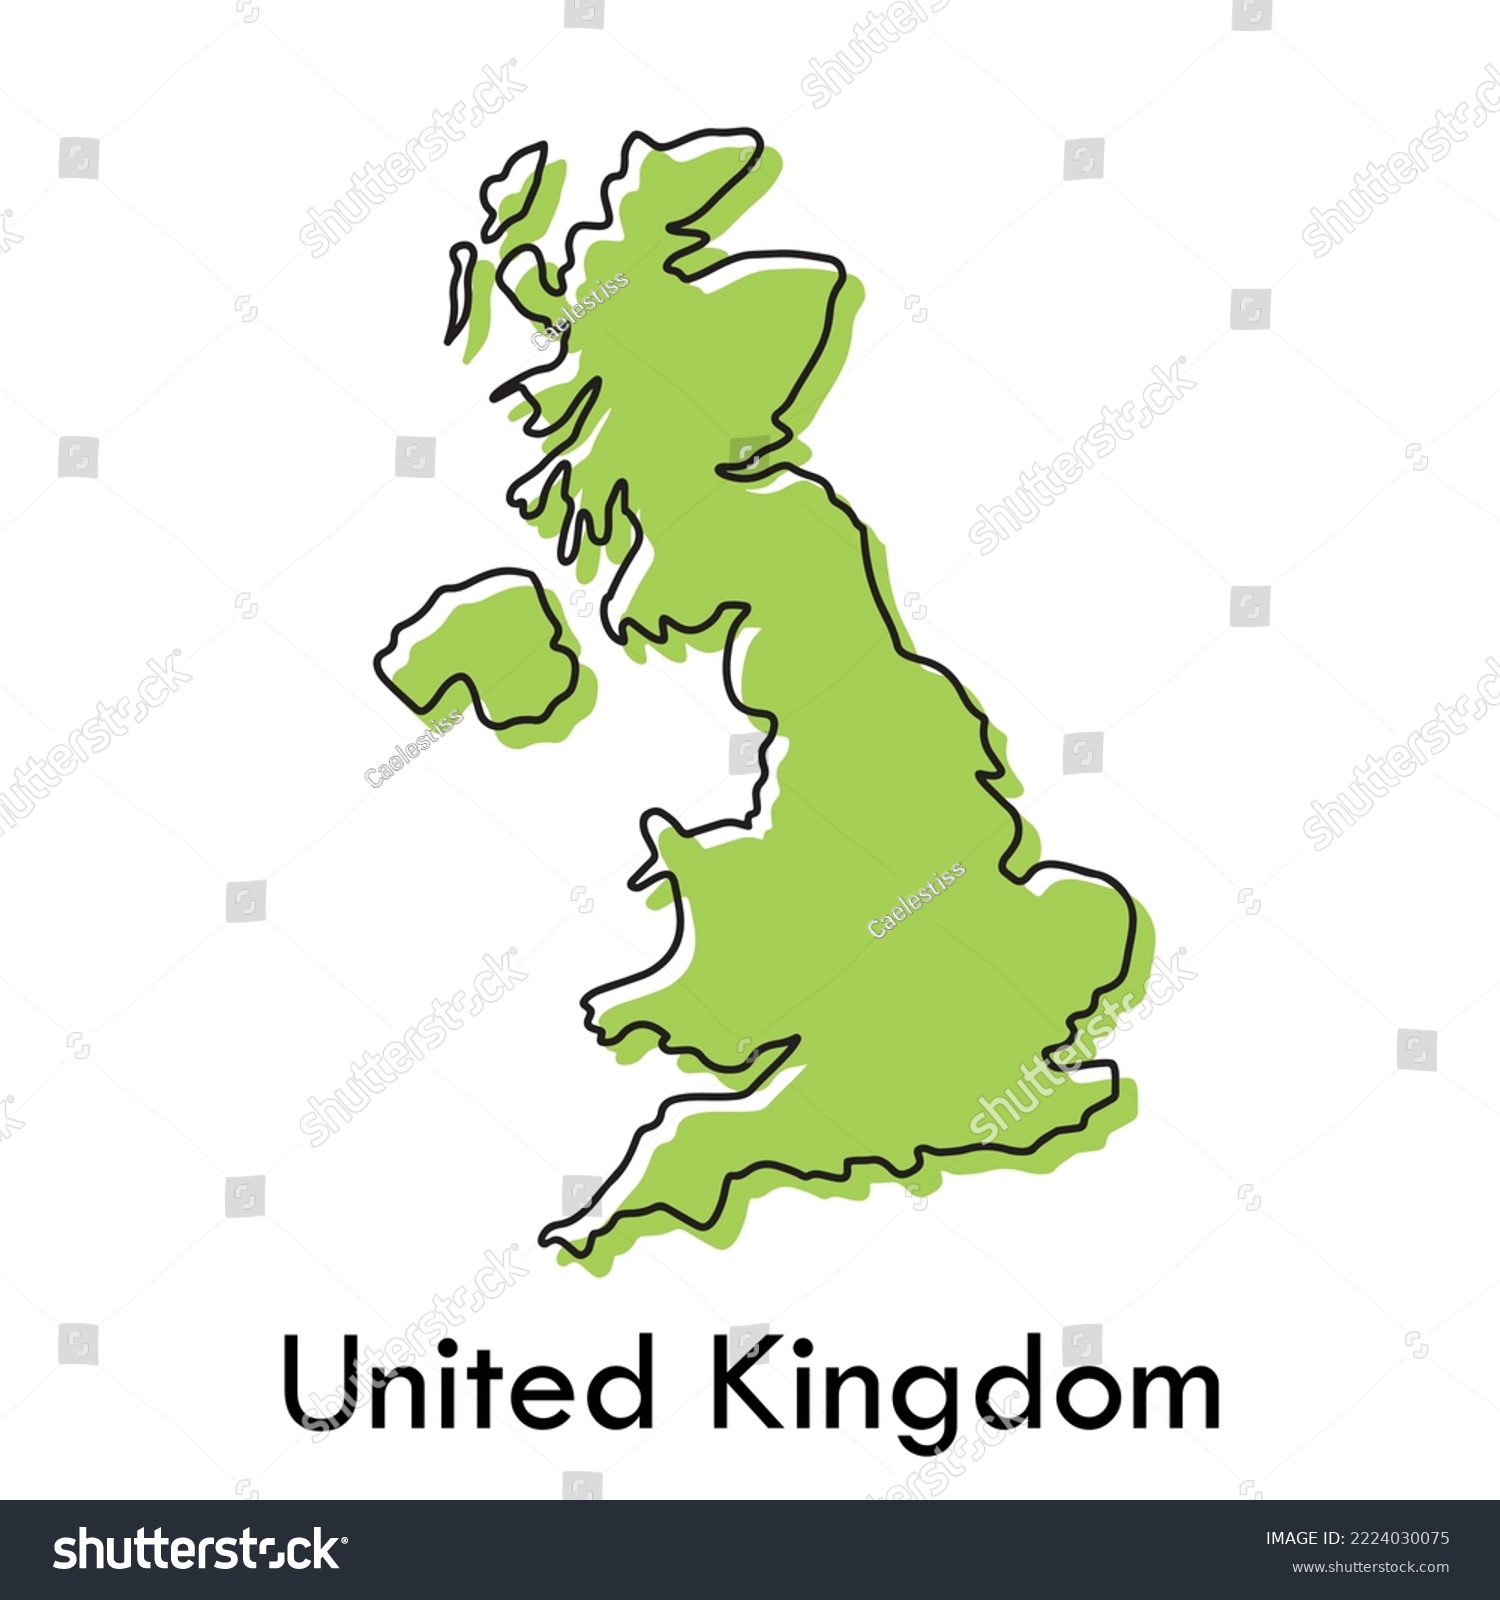 SVG of United Kingdom of Great Britain and Northern Ireland - simple hand drawn stylized concept with sketch black line outline contour map. country border silhouette drawing vector illustration. svg